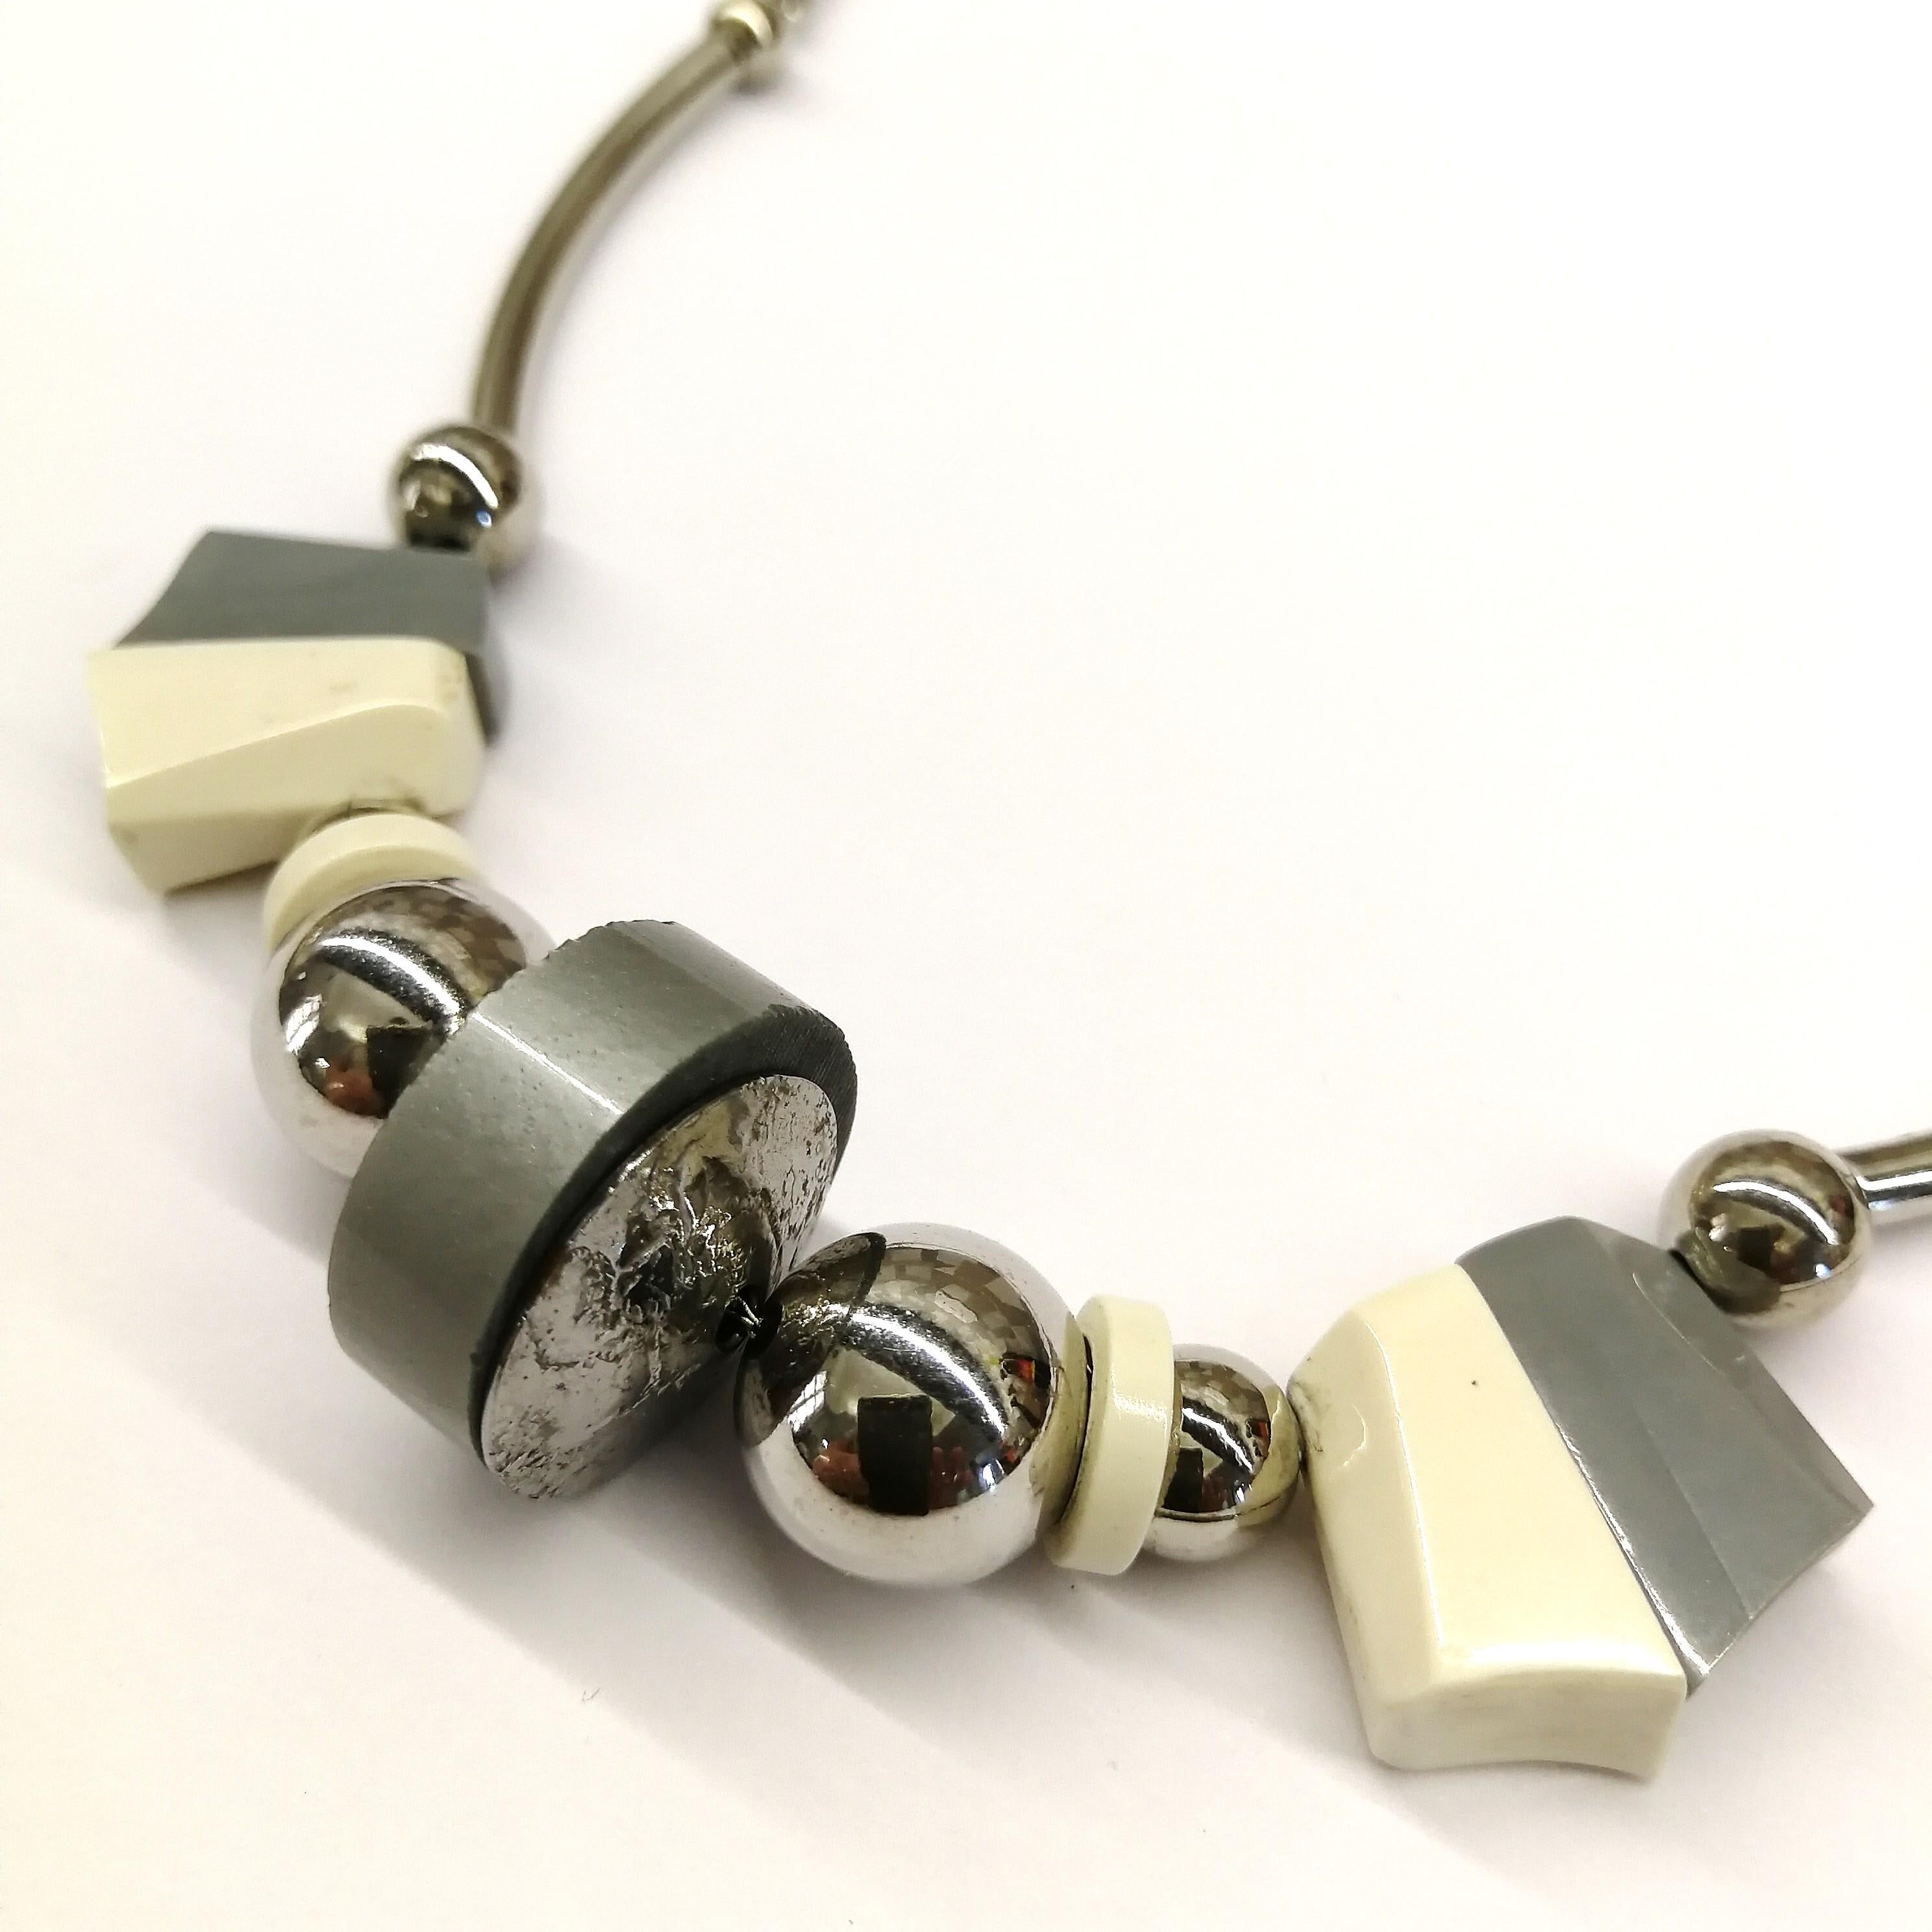 Typical of so much design that came out of Germany in the 1920s and 1930s with the explosion of Art Deco, this attractive Machine Age necklace is a prime example. In complementing tones of soft grey and cream, highlighted with chrome fittings